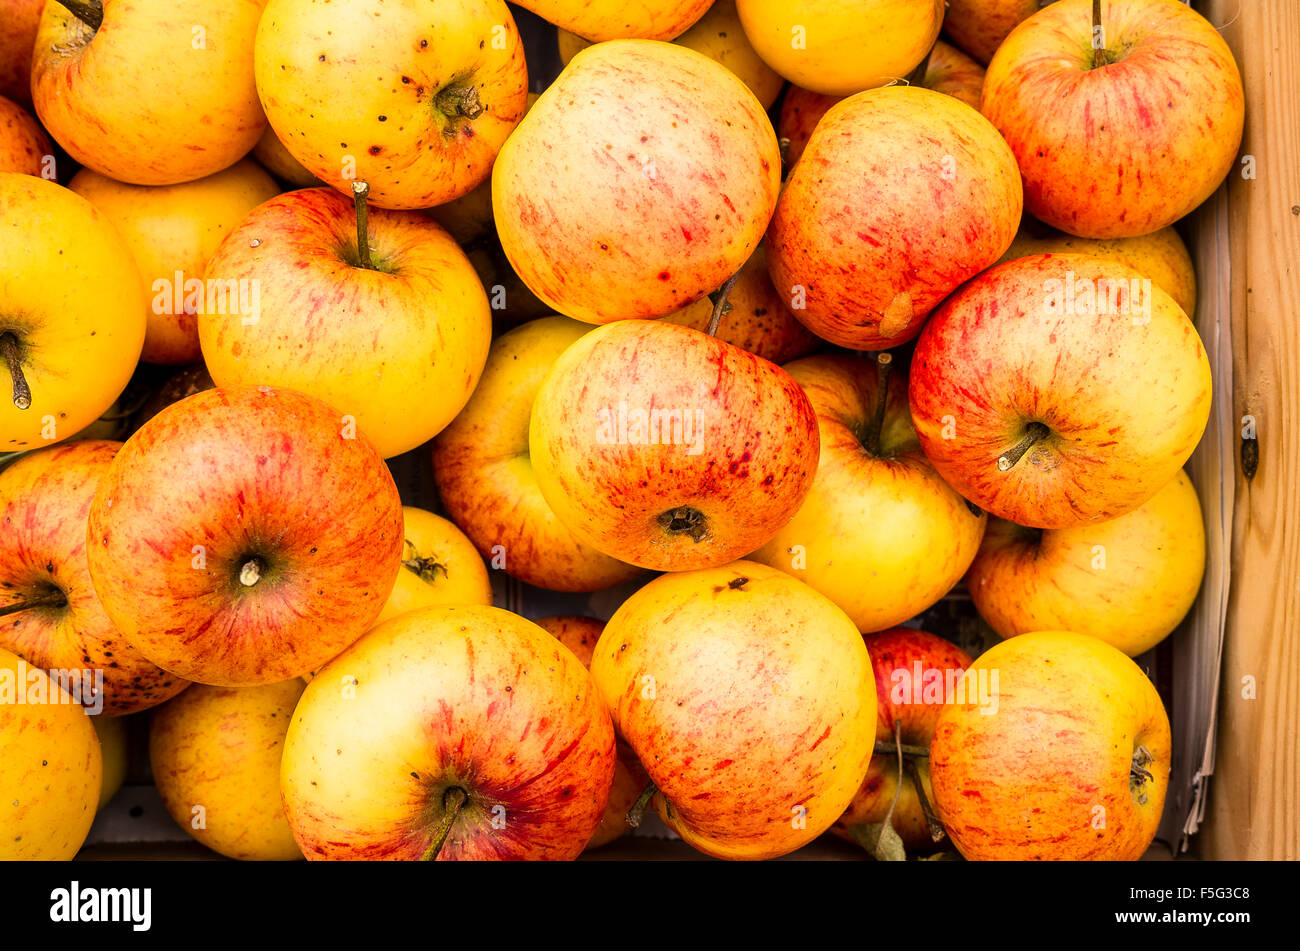 Ripe English Sunset apples picked and ready for consumption Stock Photo